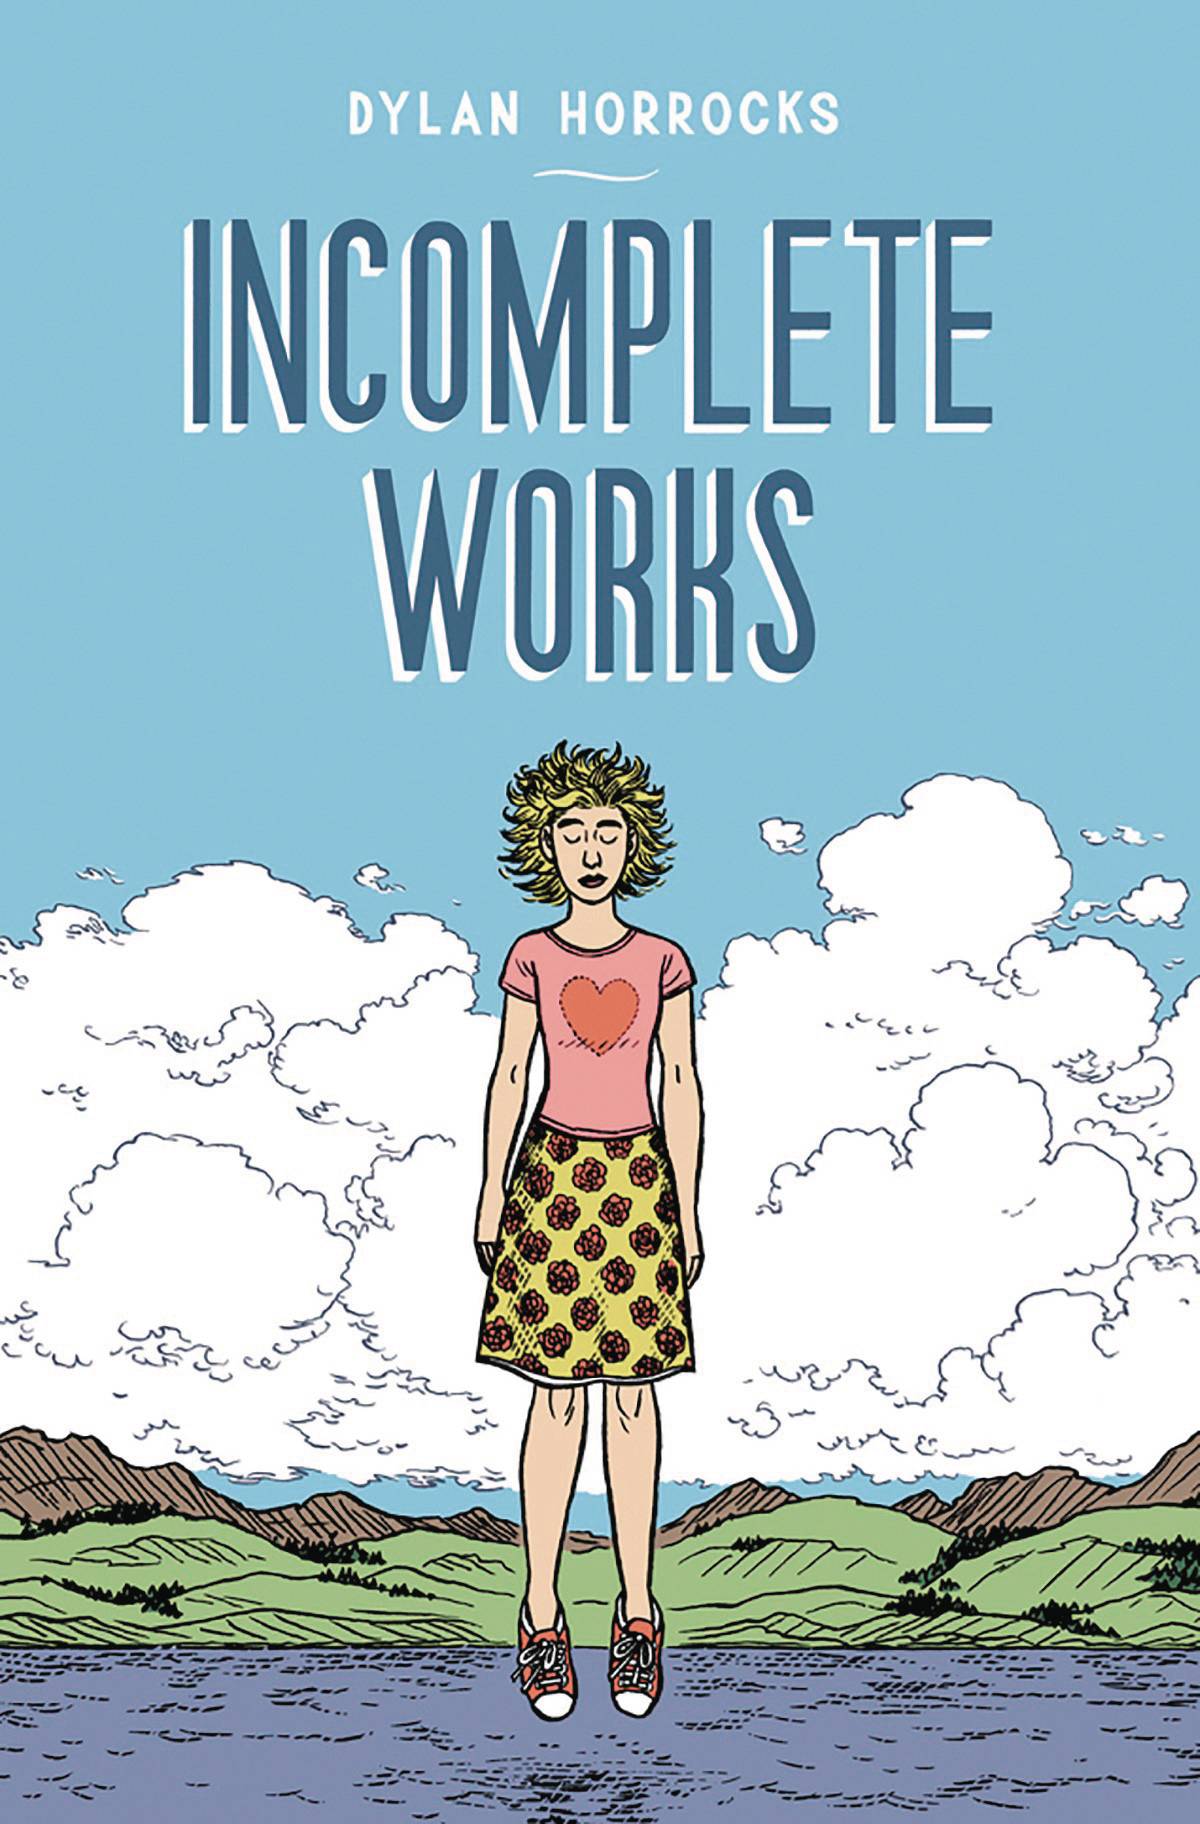 Incomplete Works Graphic Novel